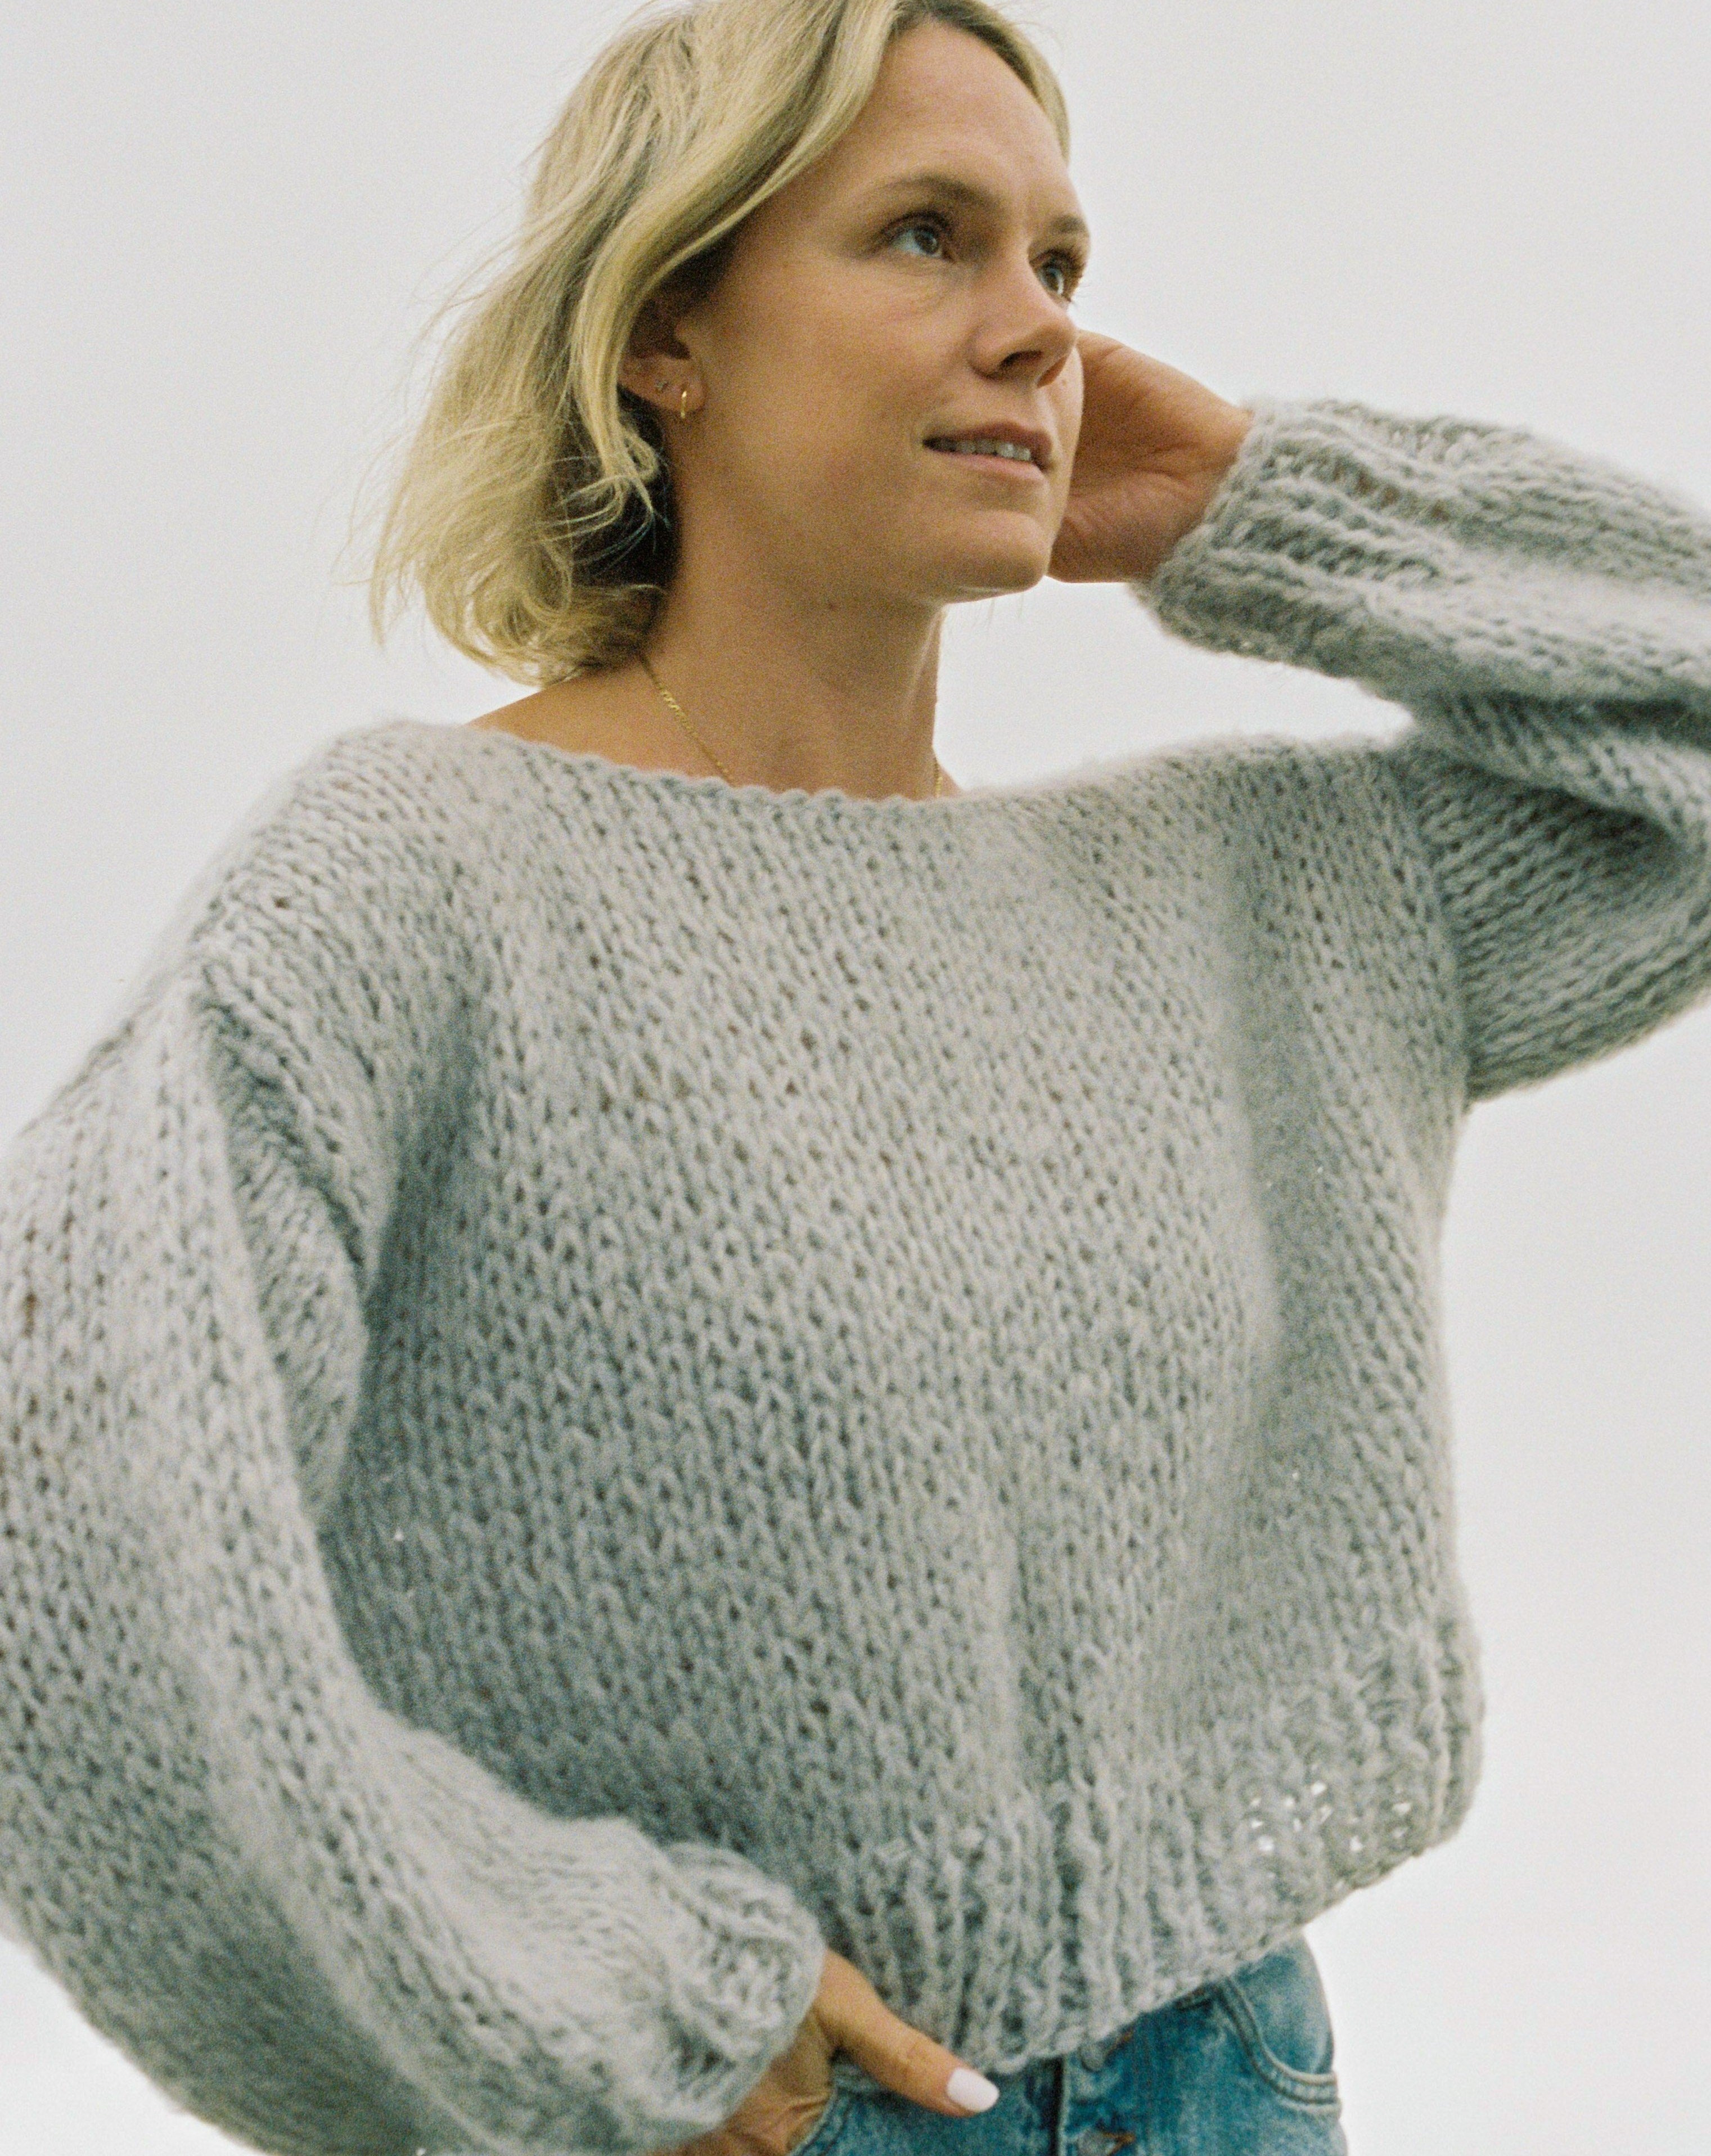 Diane Rudge Mohair Knit sweater in grey